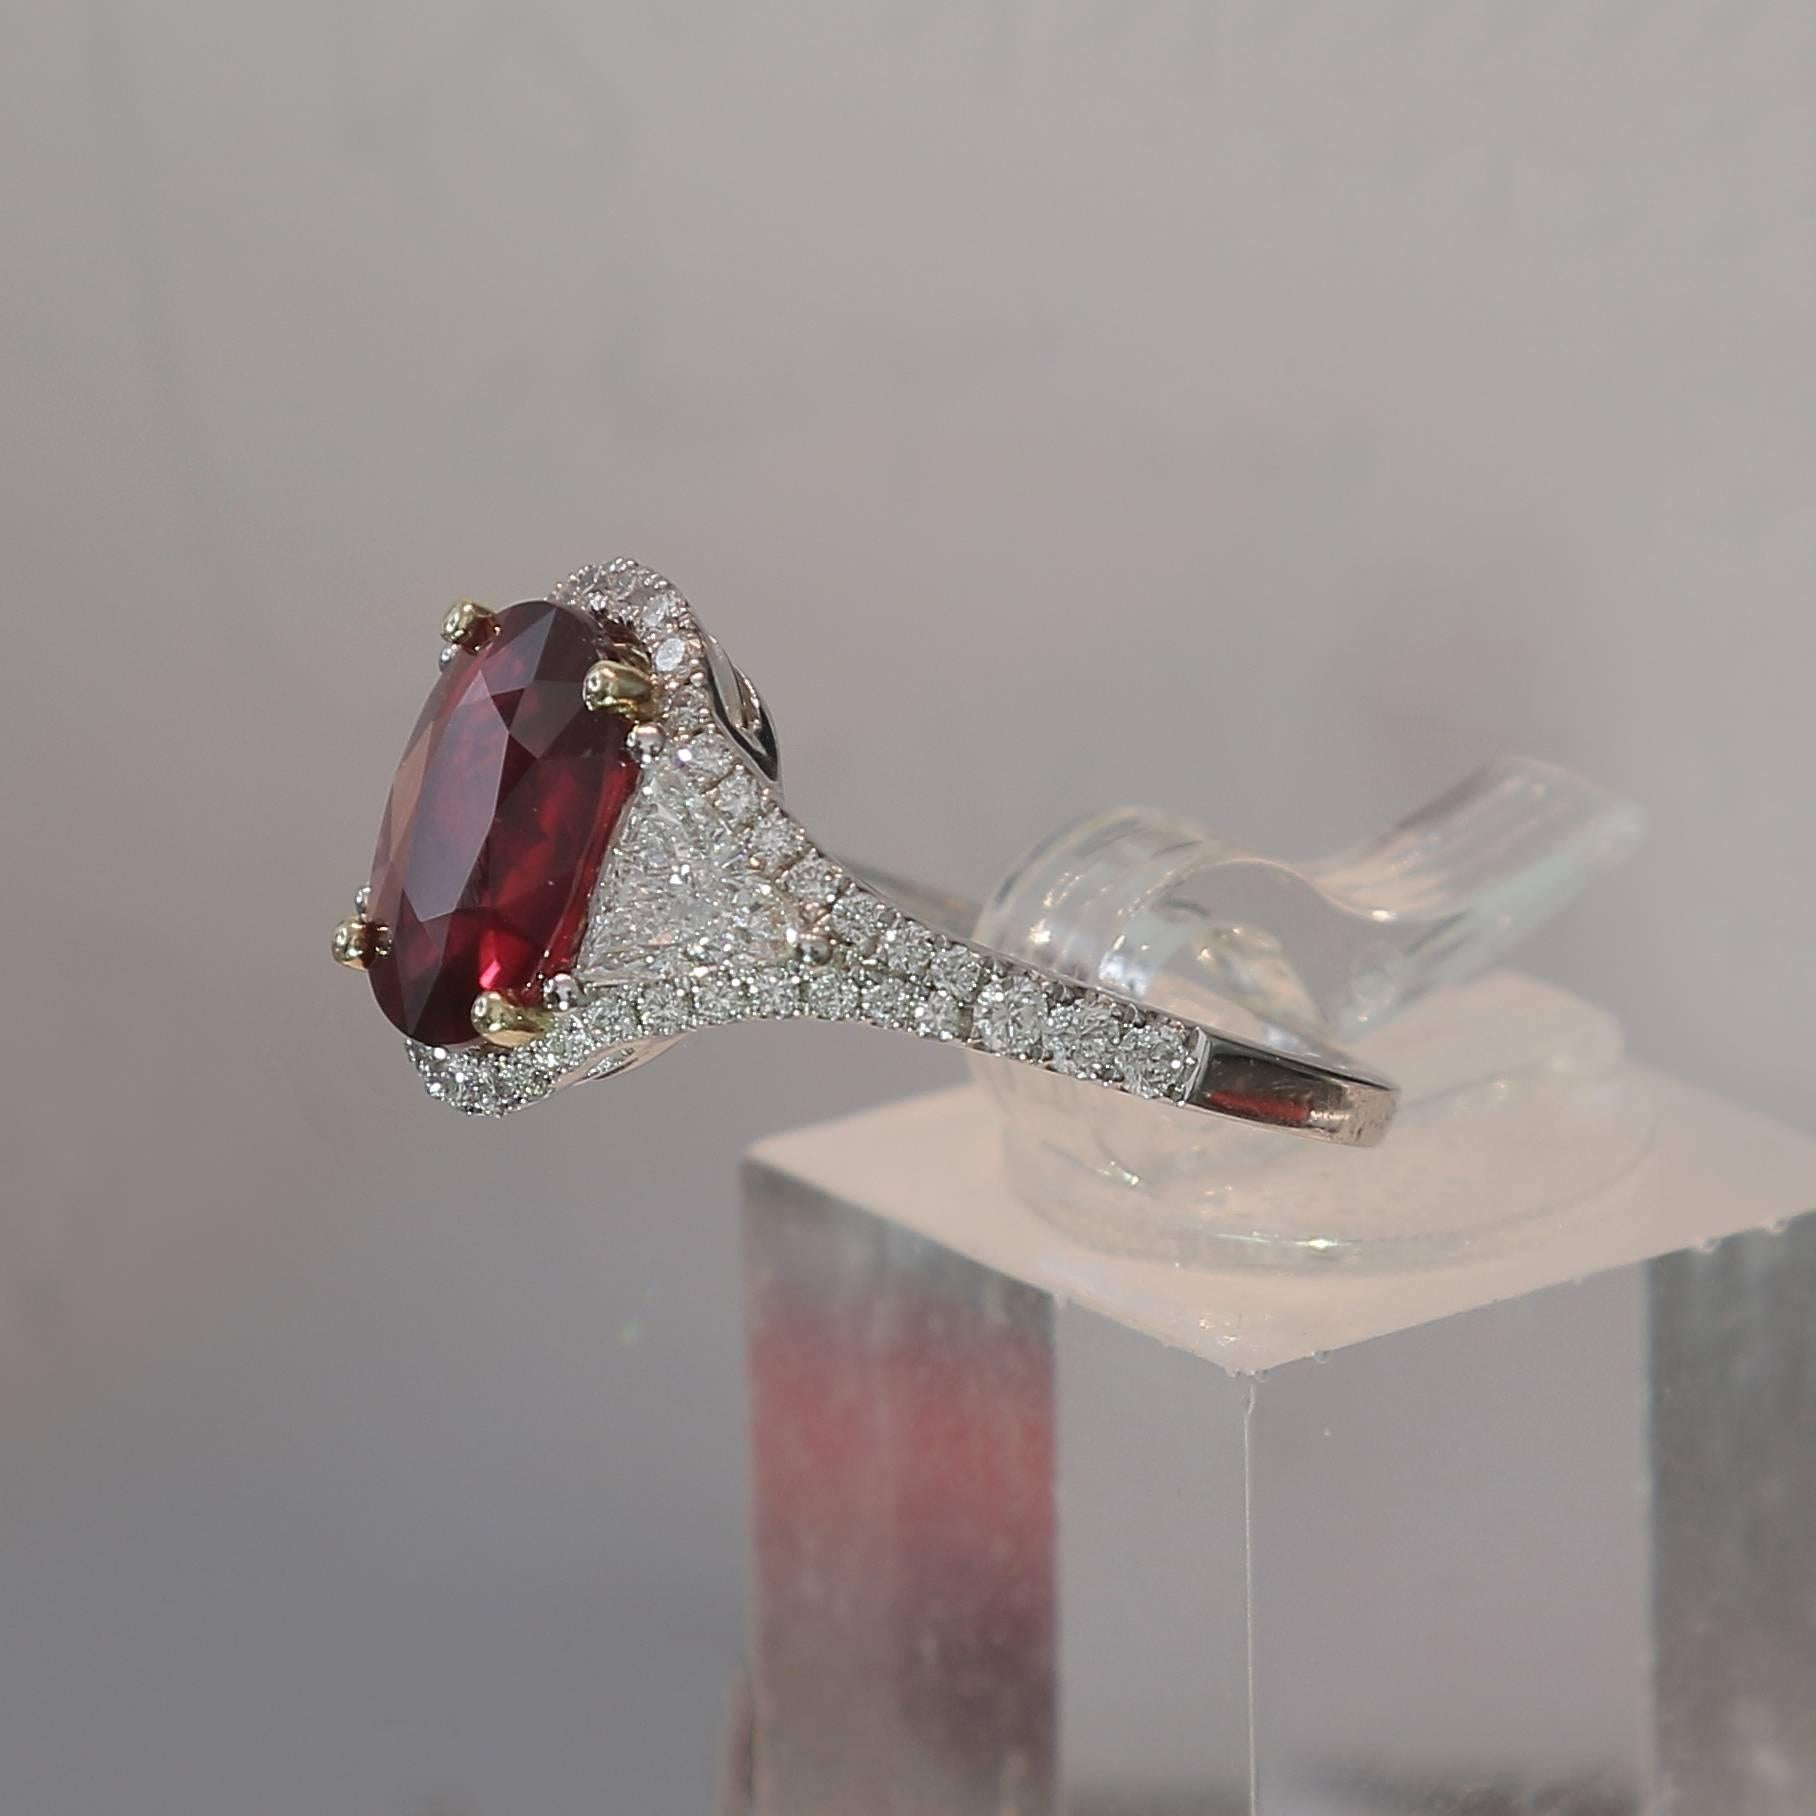 An amazing Pigeon's Blood Ruby Ring weighing 3.04 carats. 
The stone’s shape is oval, having for colors a striking Pigeon Blood color (Vivid Red). 
The ring is adjoined with two Troidia Diamond weighing 0.64 Carats and 48 Round Diamonds weighing